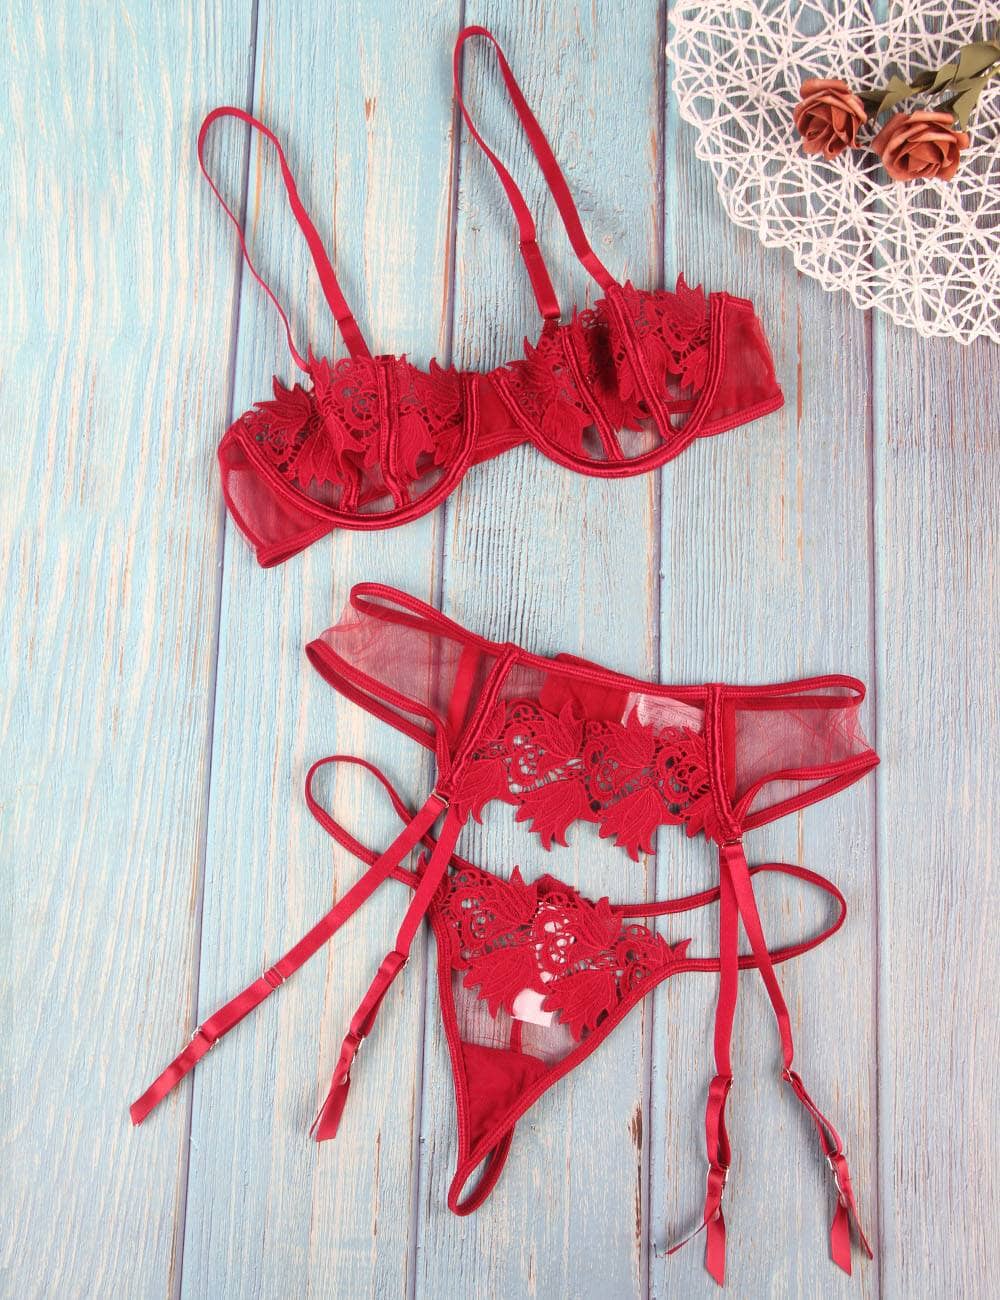 a pair of red lingerie on a wooden floor